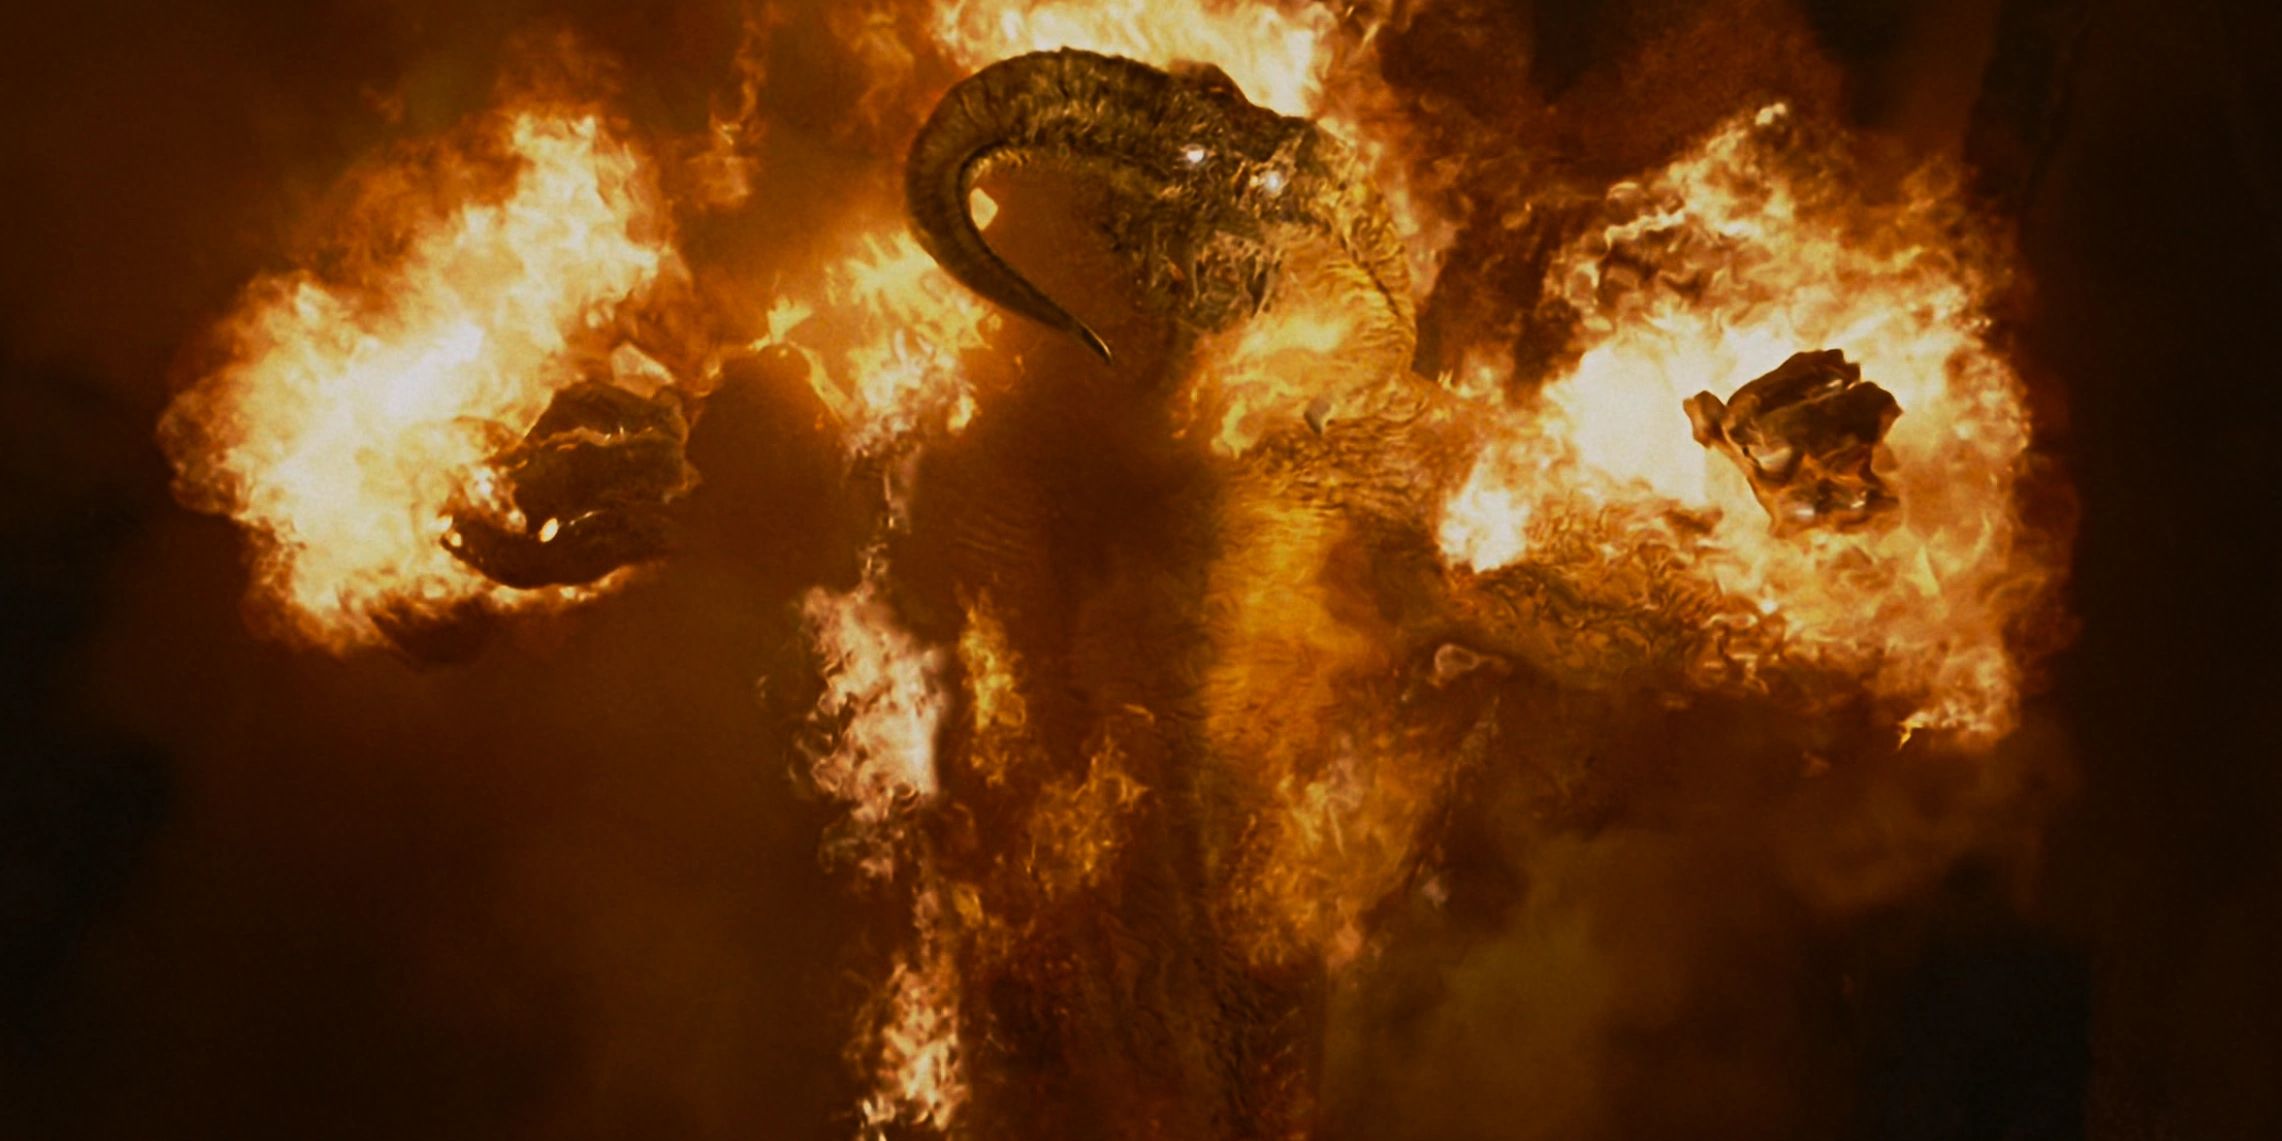 balrog in fellowship of the ring